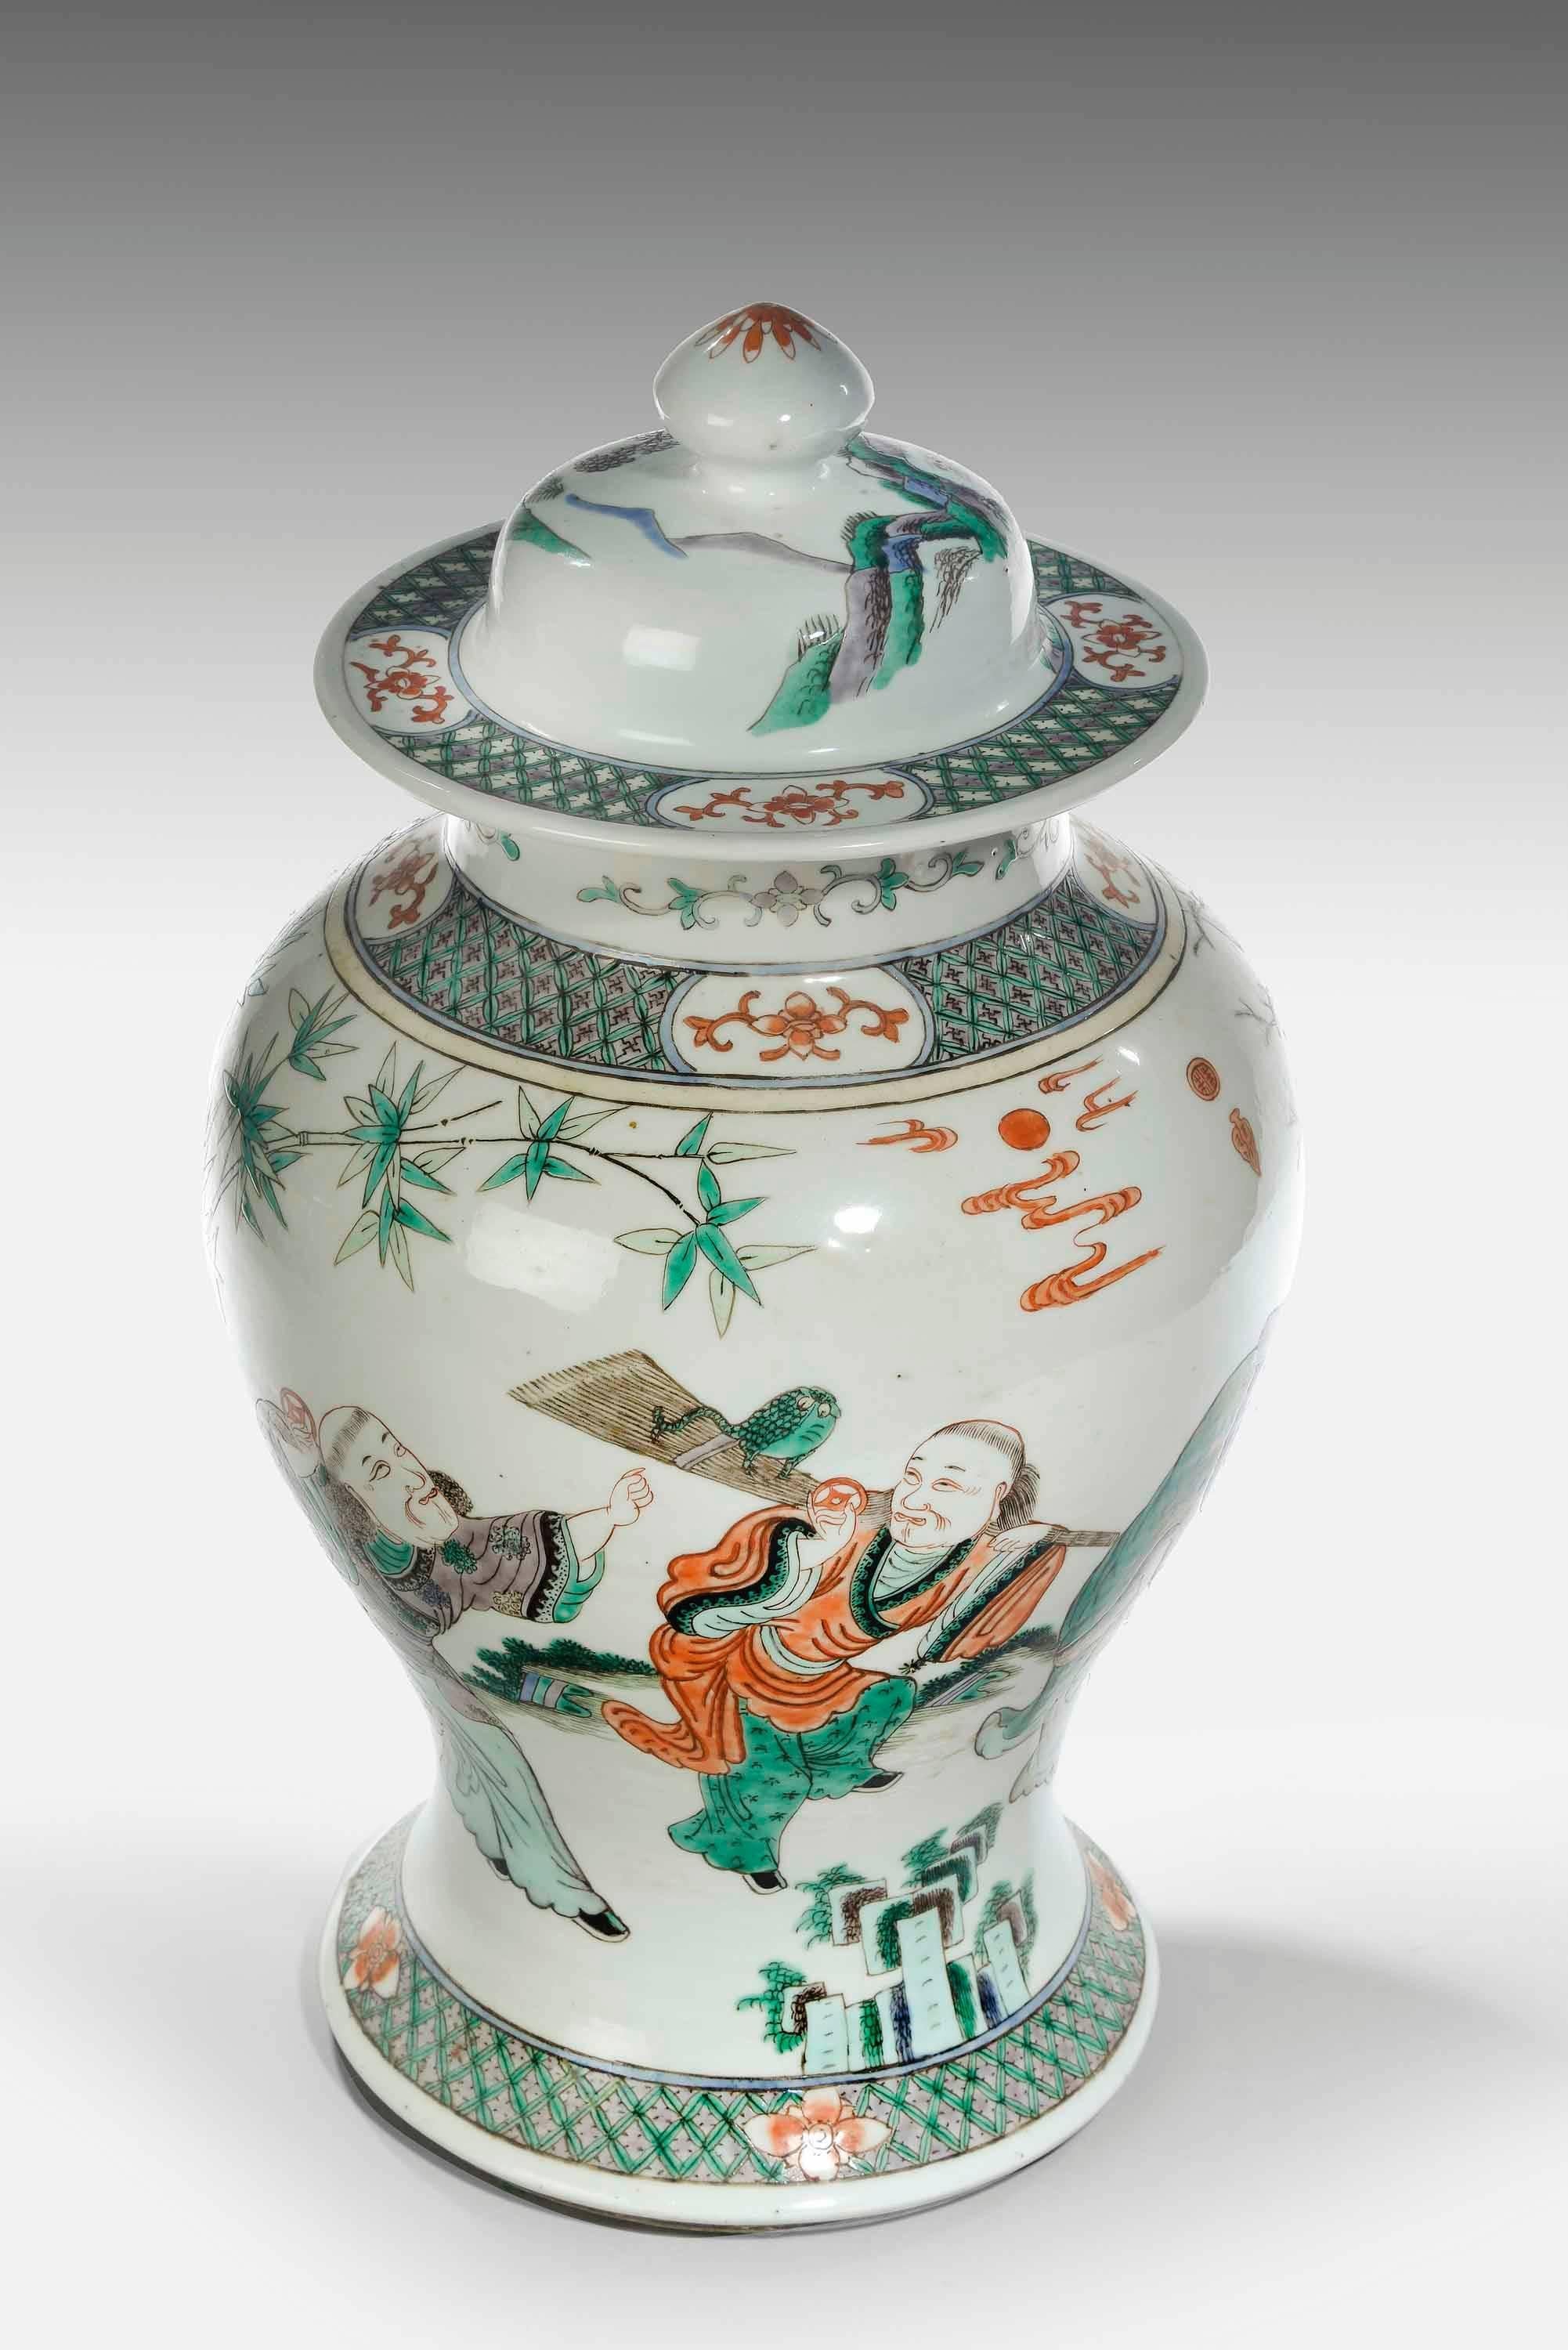 19th Century Famiille Verte Porcelain Vase In Excellent Condition In Peterborough, Northamptonshire